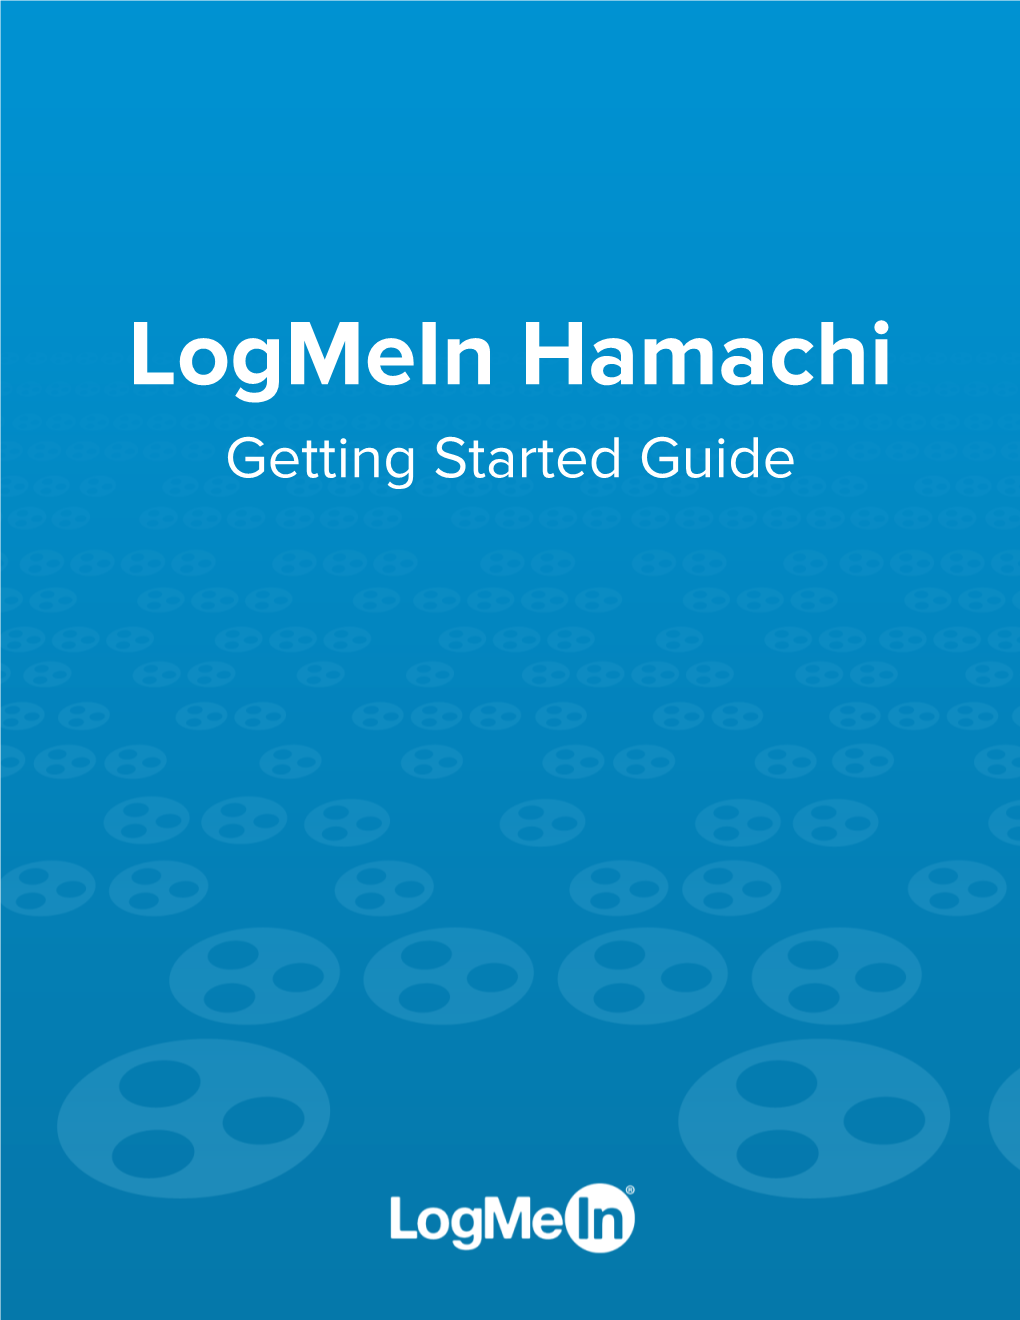 Logmein Hamachi Getting Started Guide Contents